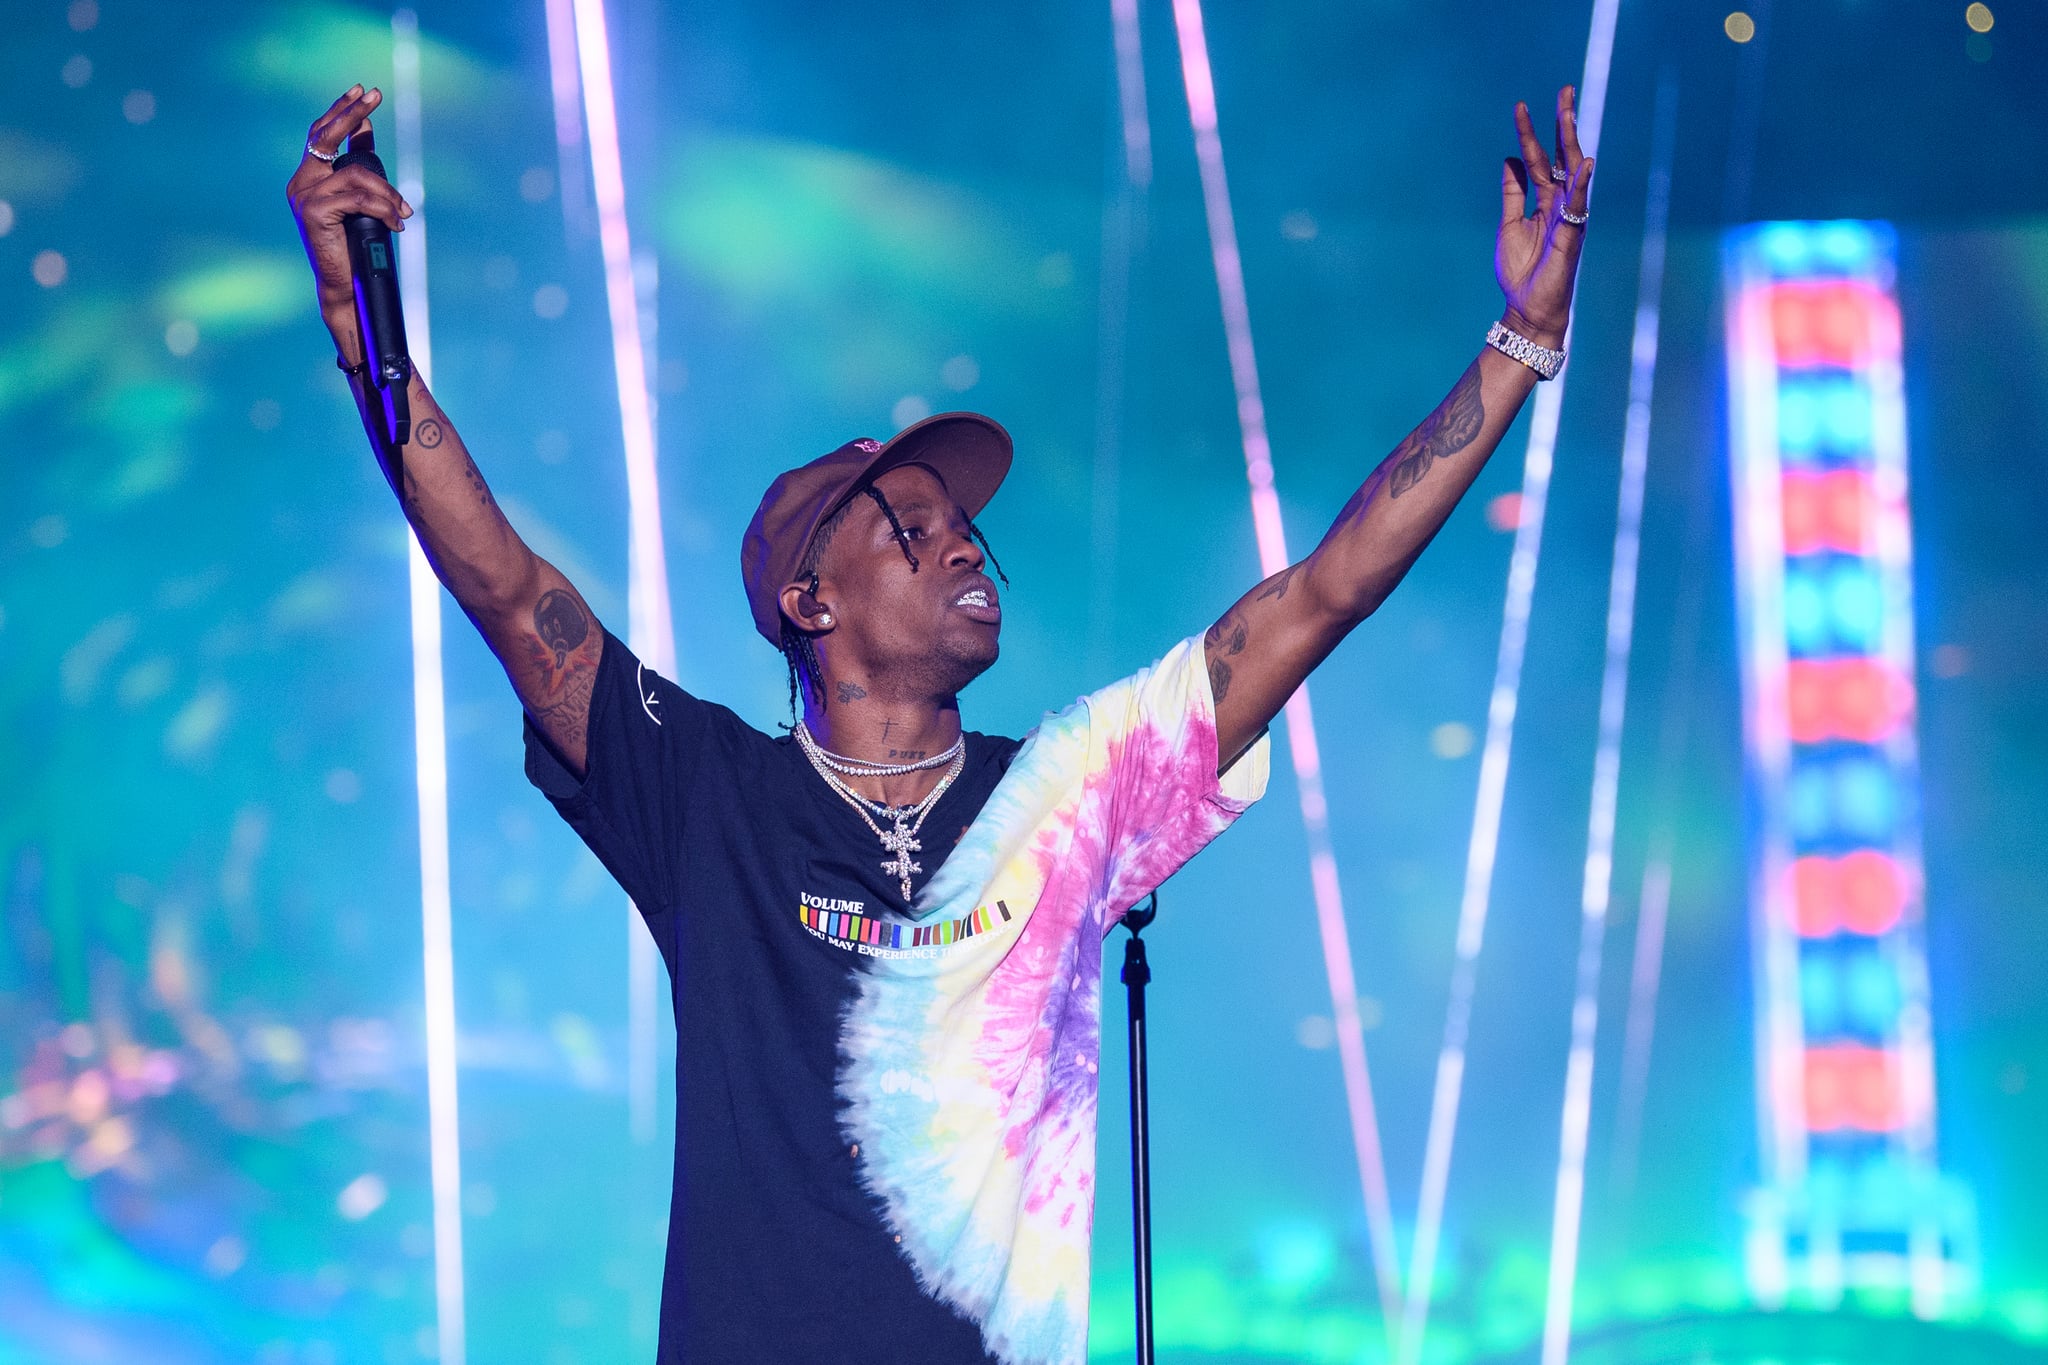 FORT LAUDERDALE, FL - MAY 11:  Travis Scott performs on stage during day two of Rolling Loud at Hard Rock Stadium on May 11, 2019 in Miami Gardens , FL.  (Photo by Jason Koerner/Getty Images)